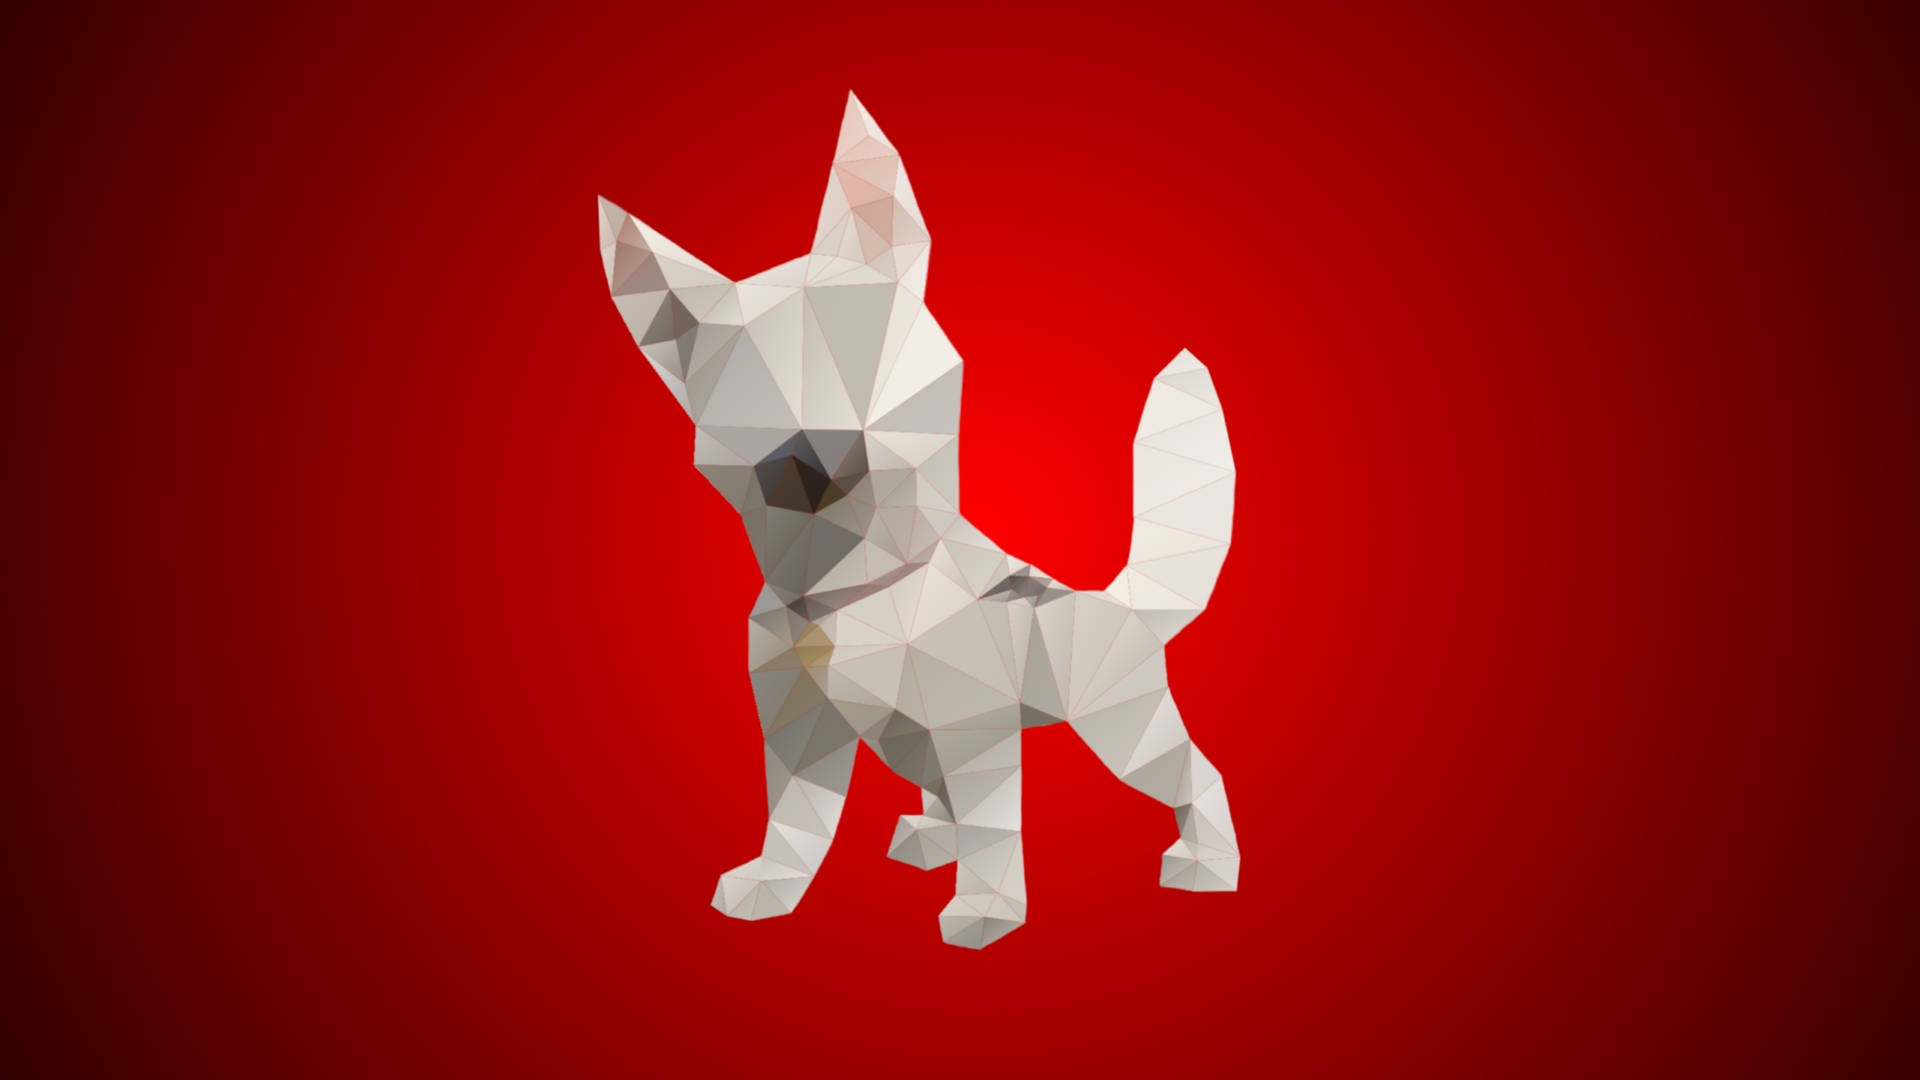 Bolt 3d Figure In Red Background